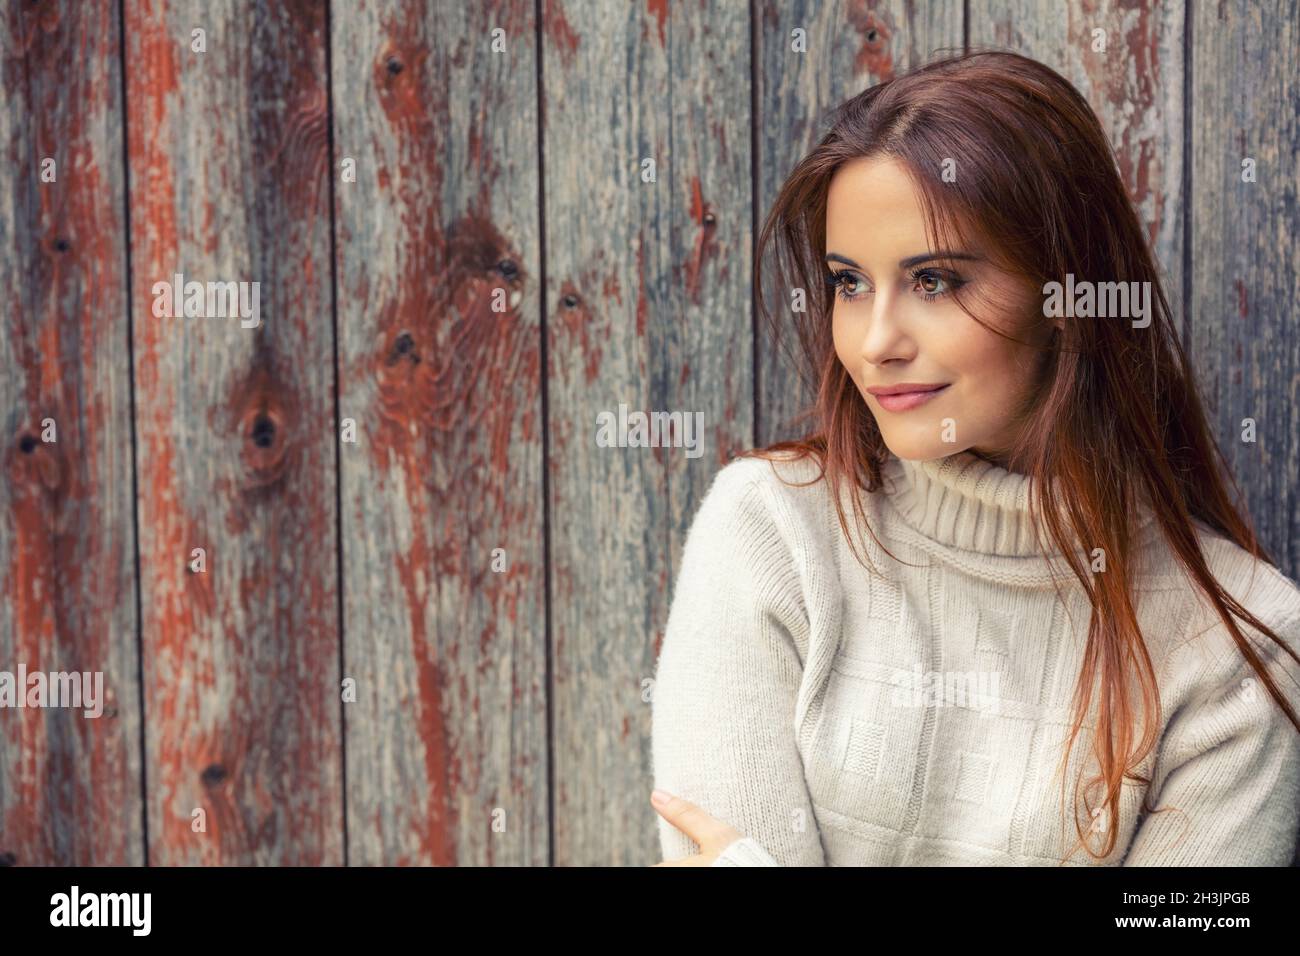 Outdoor portrait of beautiful girl or young woman with red hair wearing a white jumper leaning against an old wooden background Stock Photo